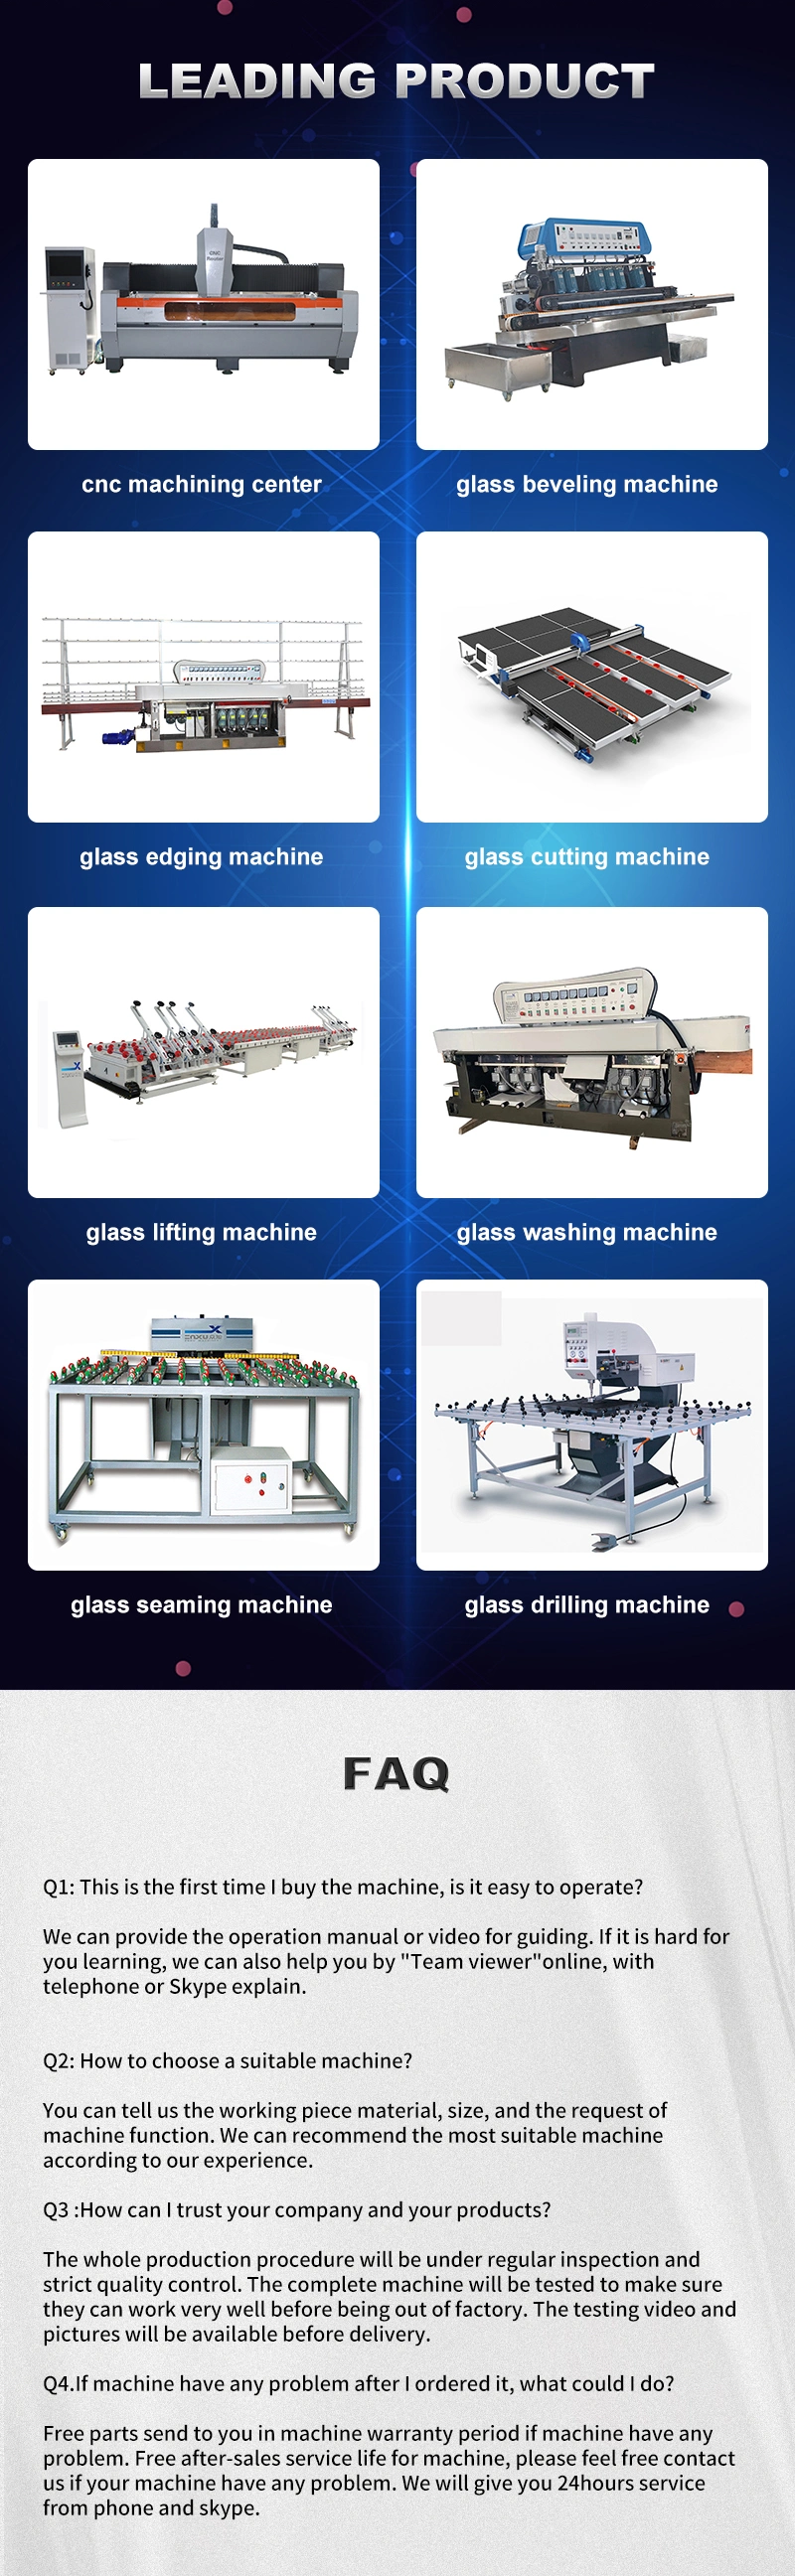 Glass Beveling Machine Machine for Bevelling Glass with 8 Motors